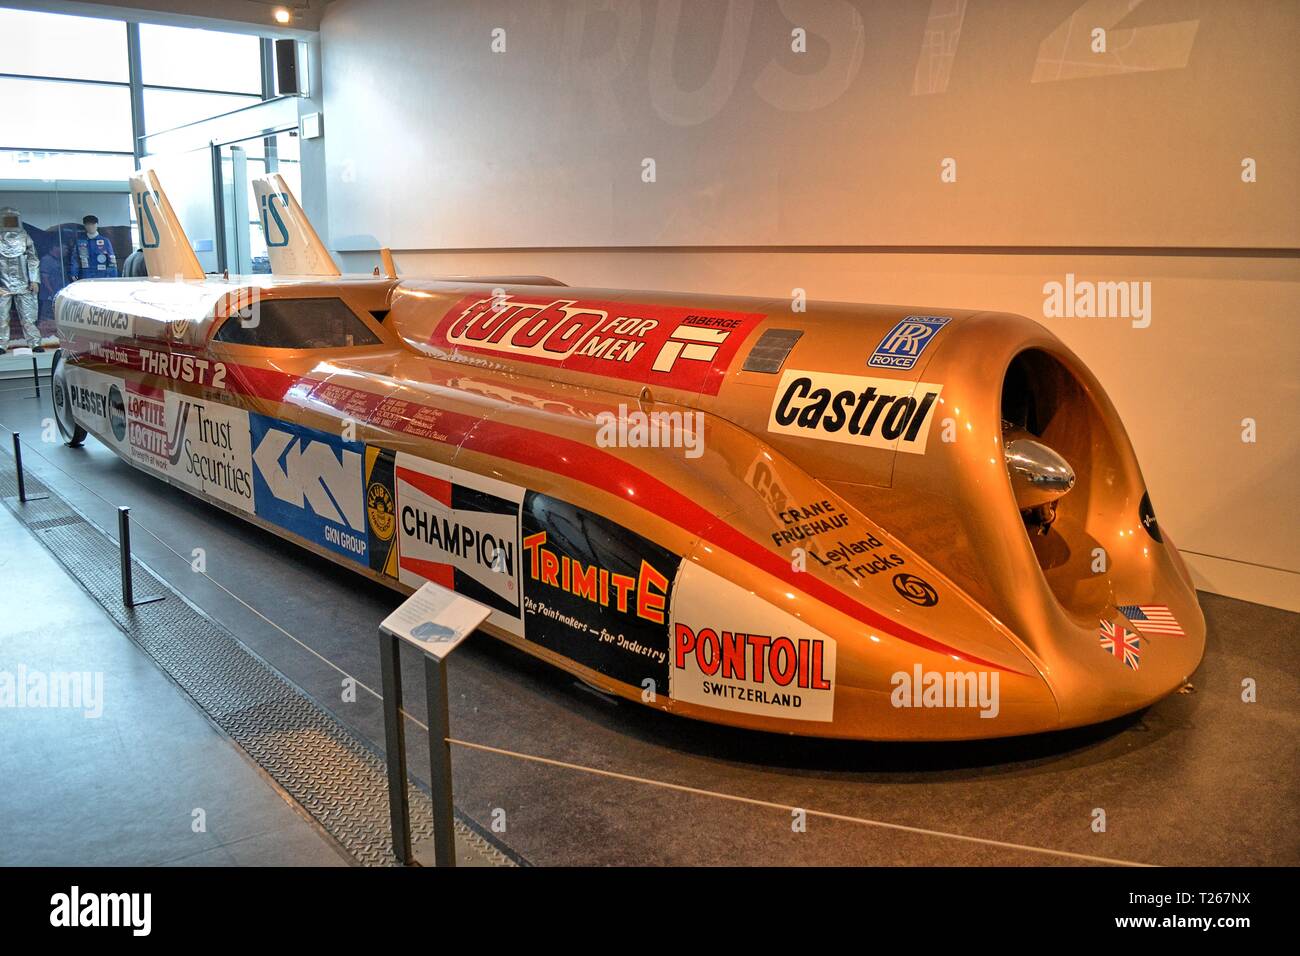 Thrust 2 World Land Speed Car, which reached 248.87 mph in 1980 - Coventry Transport Museum, Coventry, West Midlands, UK Stock Photo